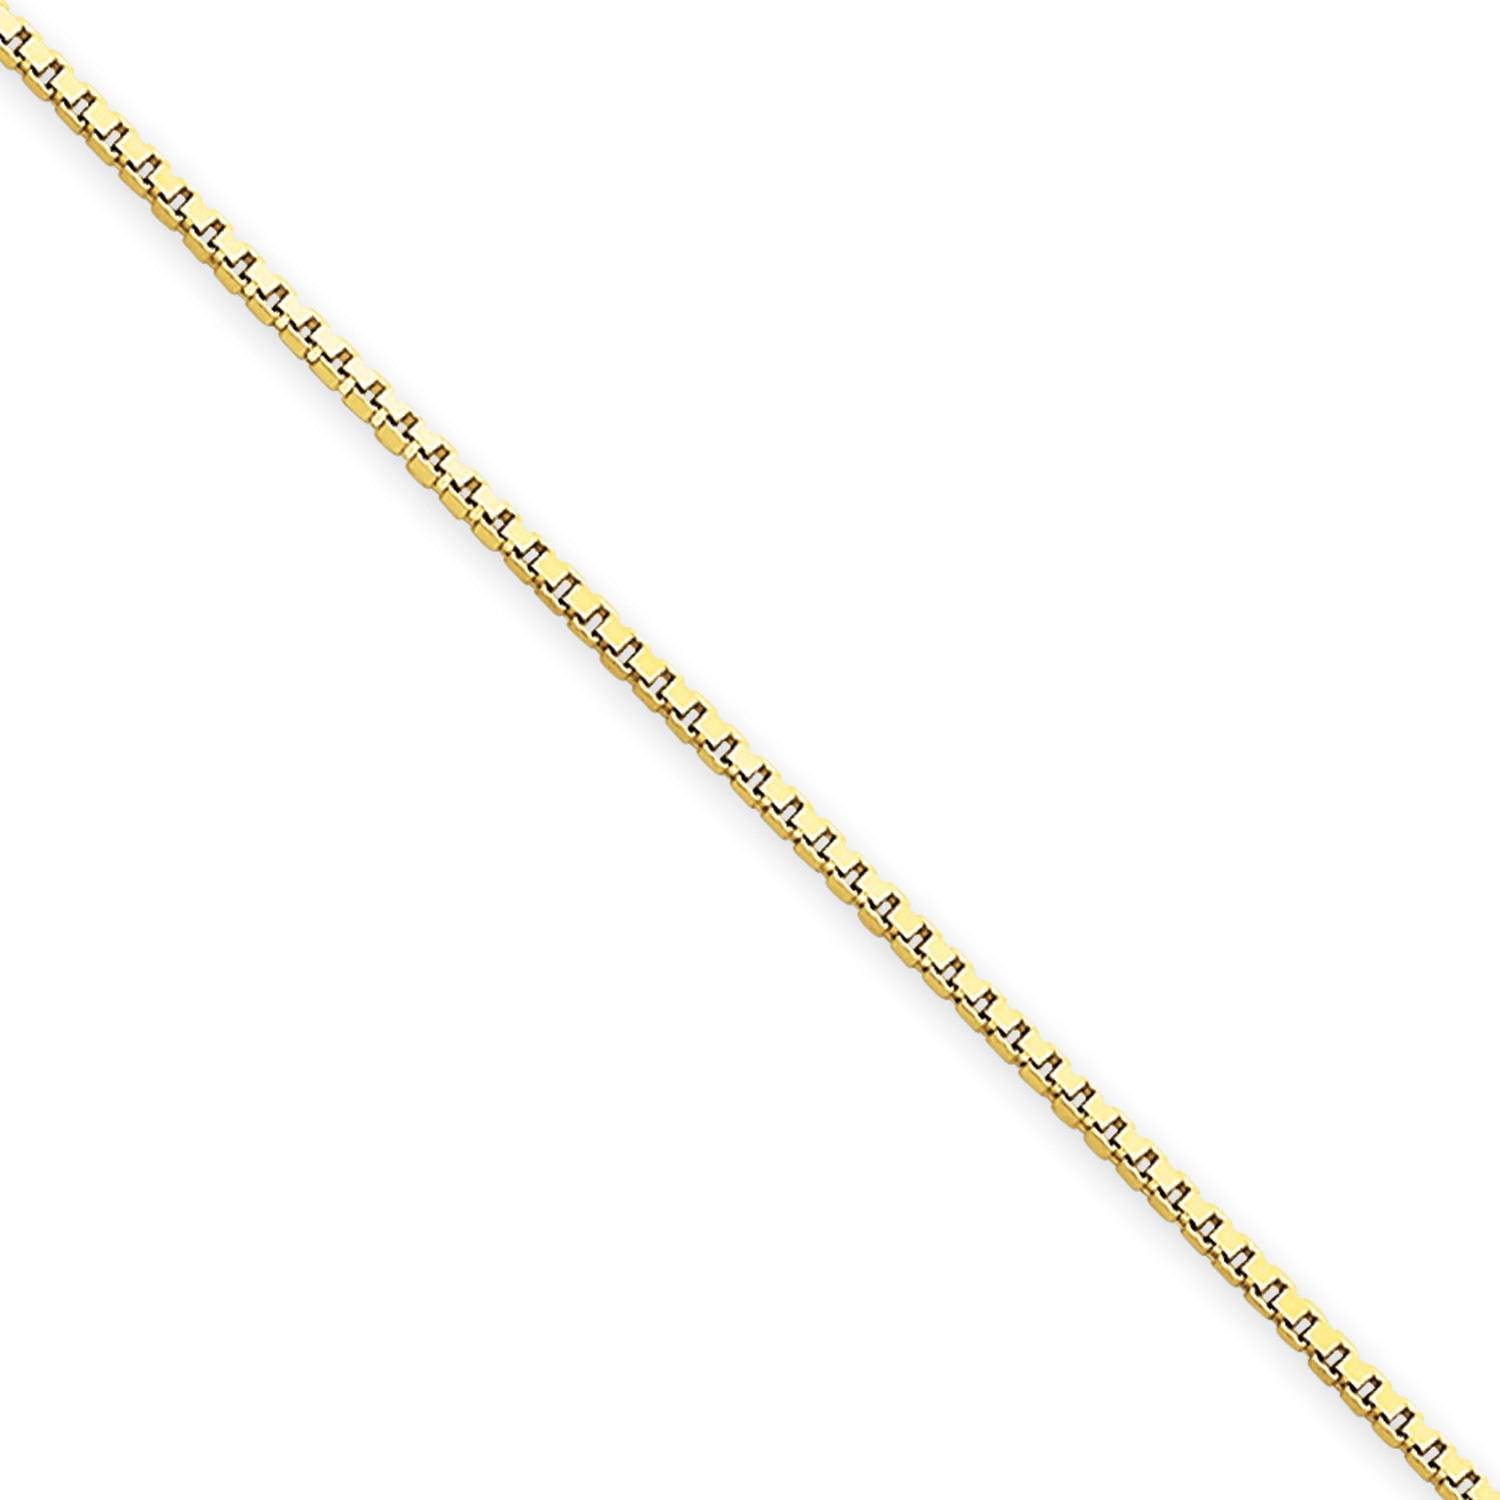 Finejewelers 14k Yellow Gold 1.0mm Sparkle Singapore Chain Necklace 